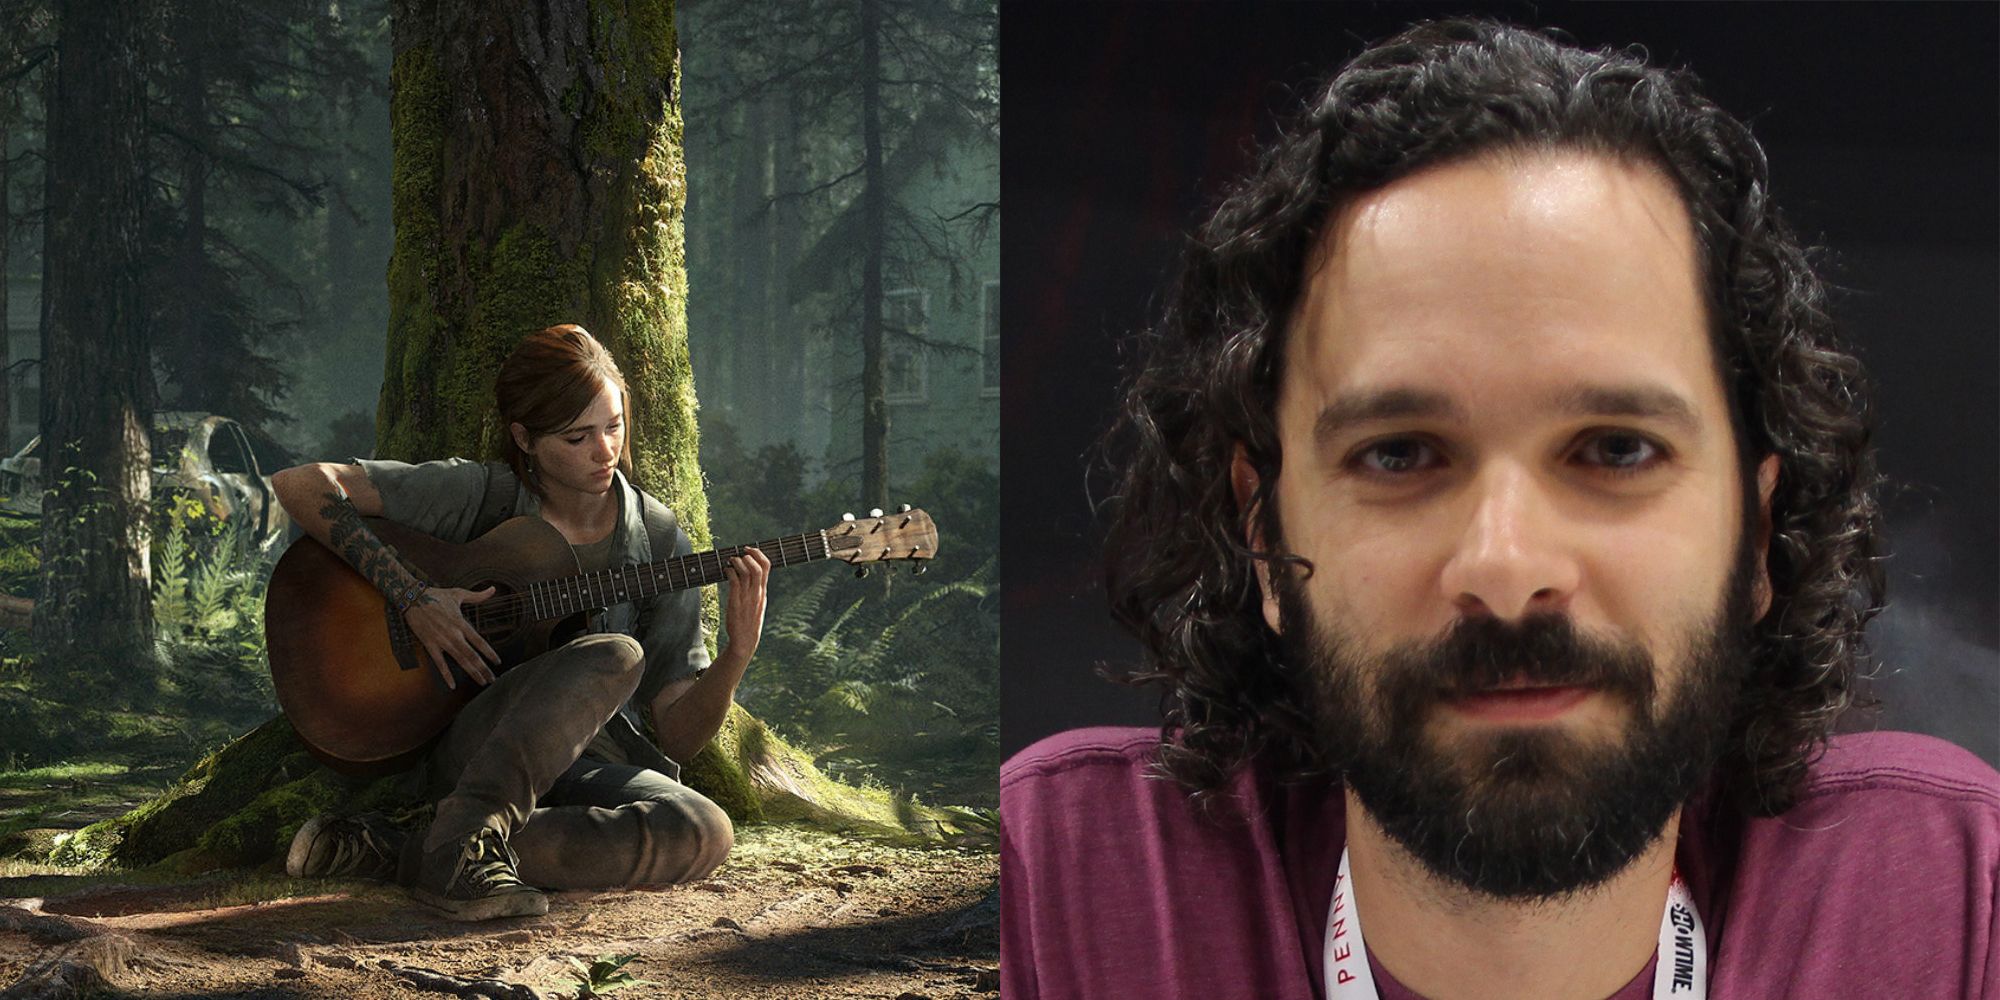 Naughty Dog VP And The Last of Us Part II Director Neil Druckmann